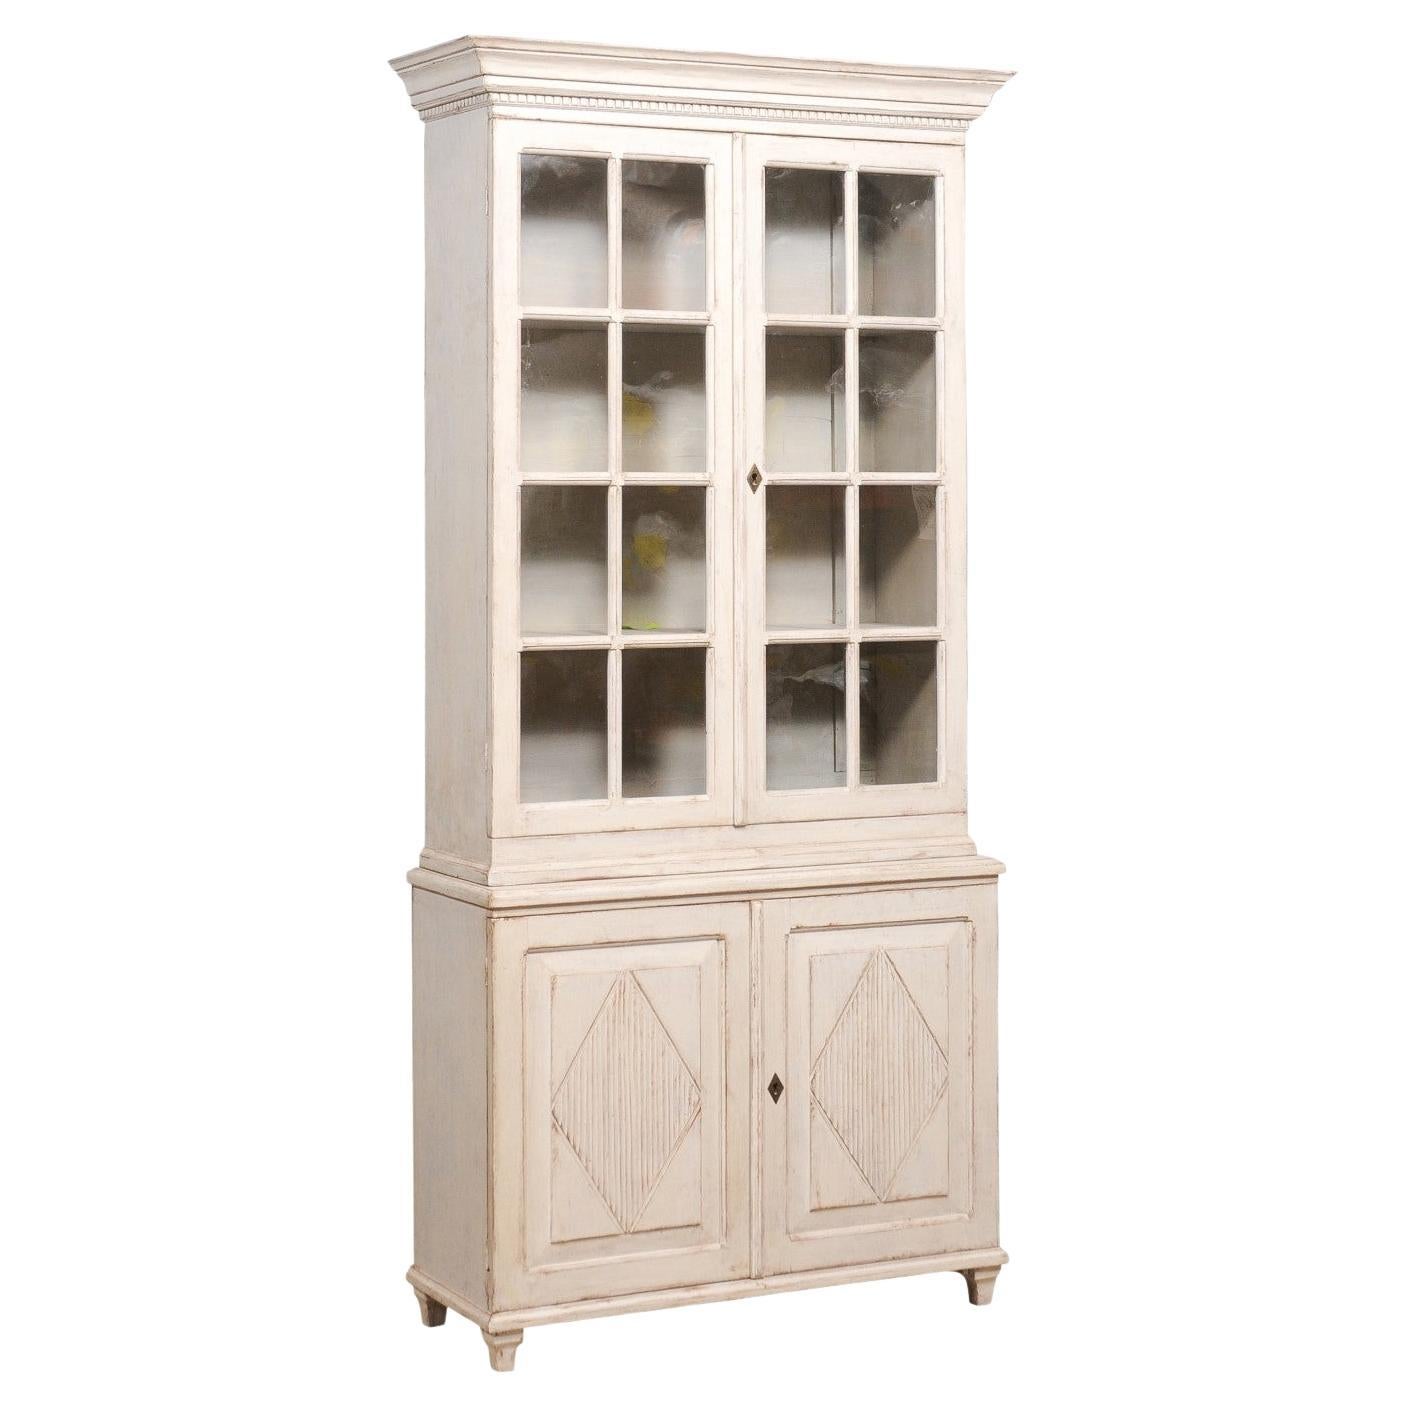 Gustavian Style 1880s Light Gray Painted Vitrine Cabinet with Glass Doors